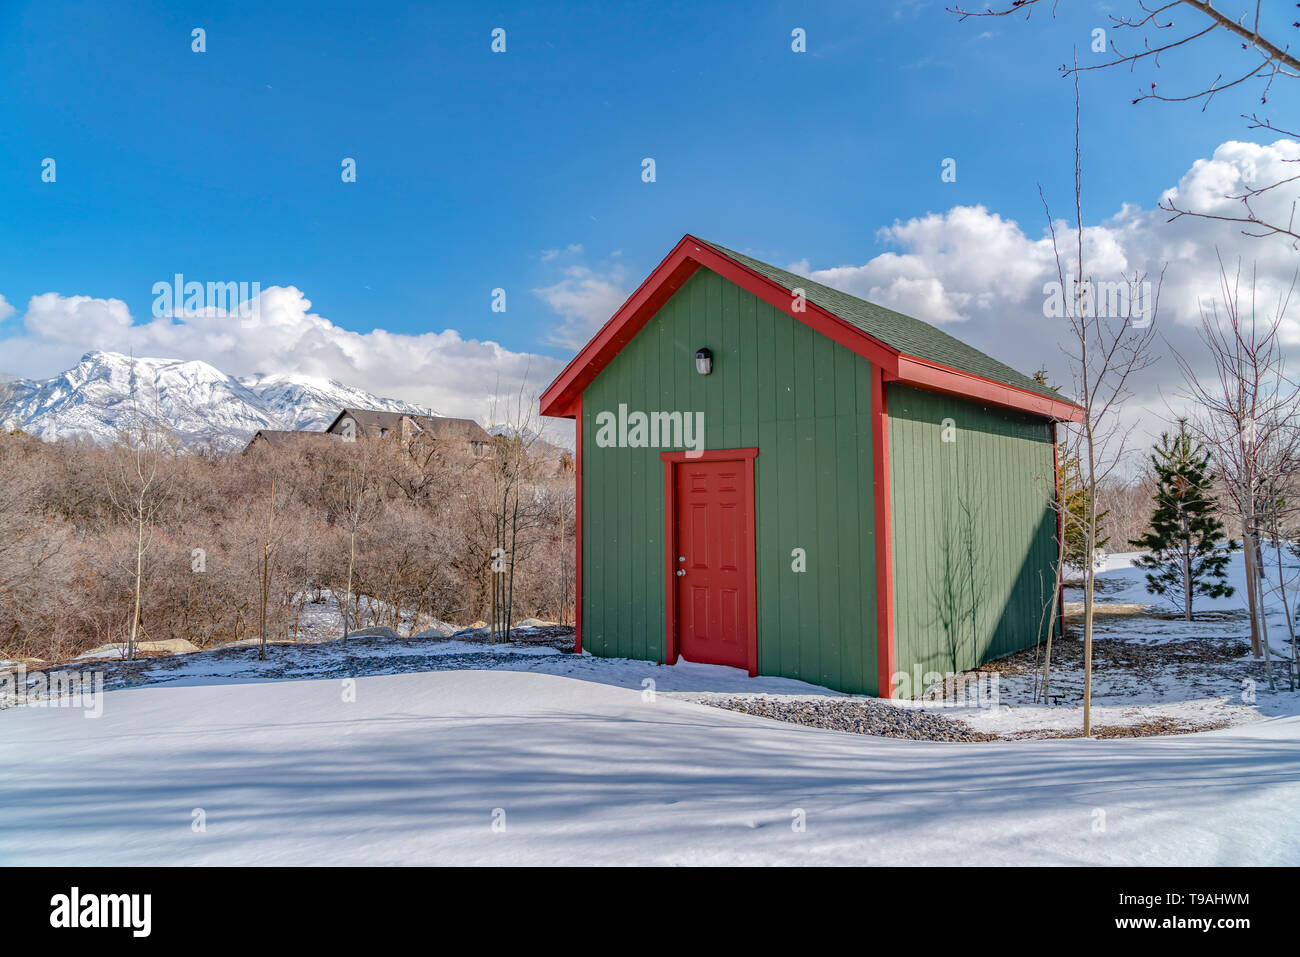 Exterior of a wooden storage shed built on a snow covered ground in winter Stock Photo